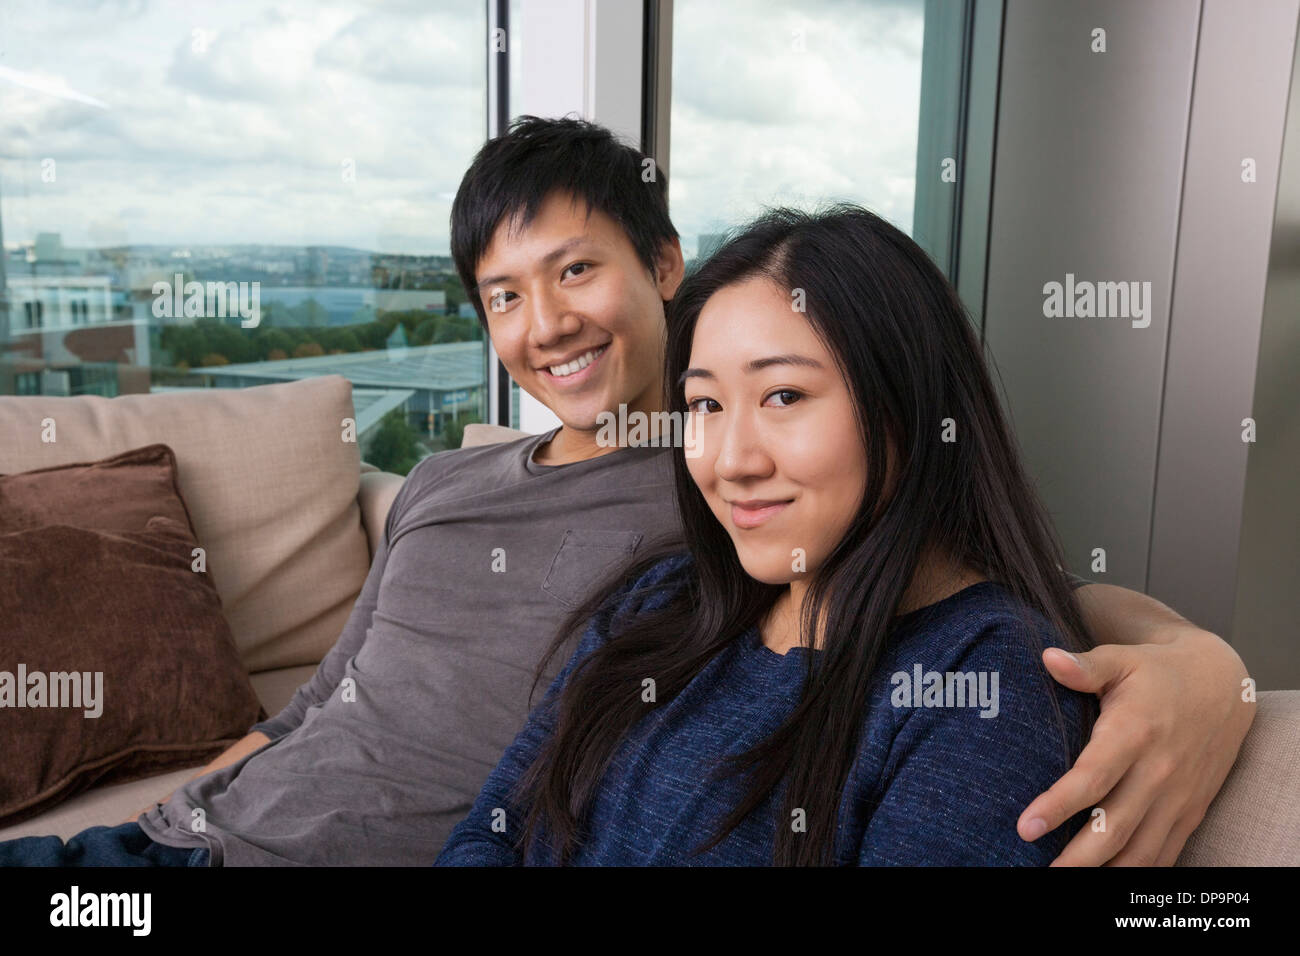 Portrait of happy friends sitting on sofa at home Banque D'Images